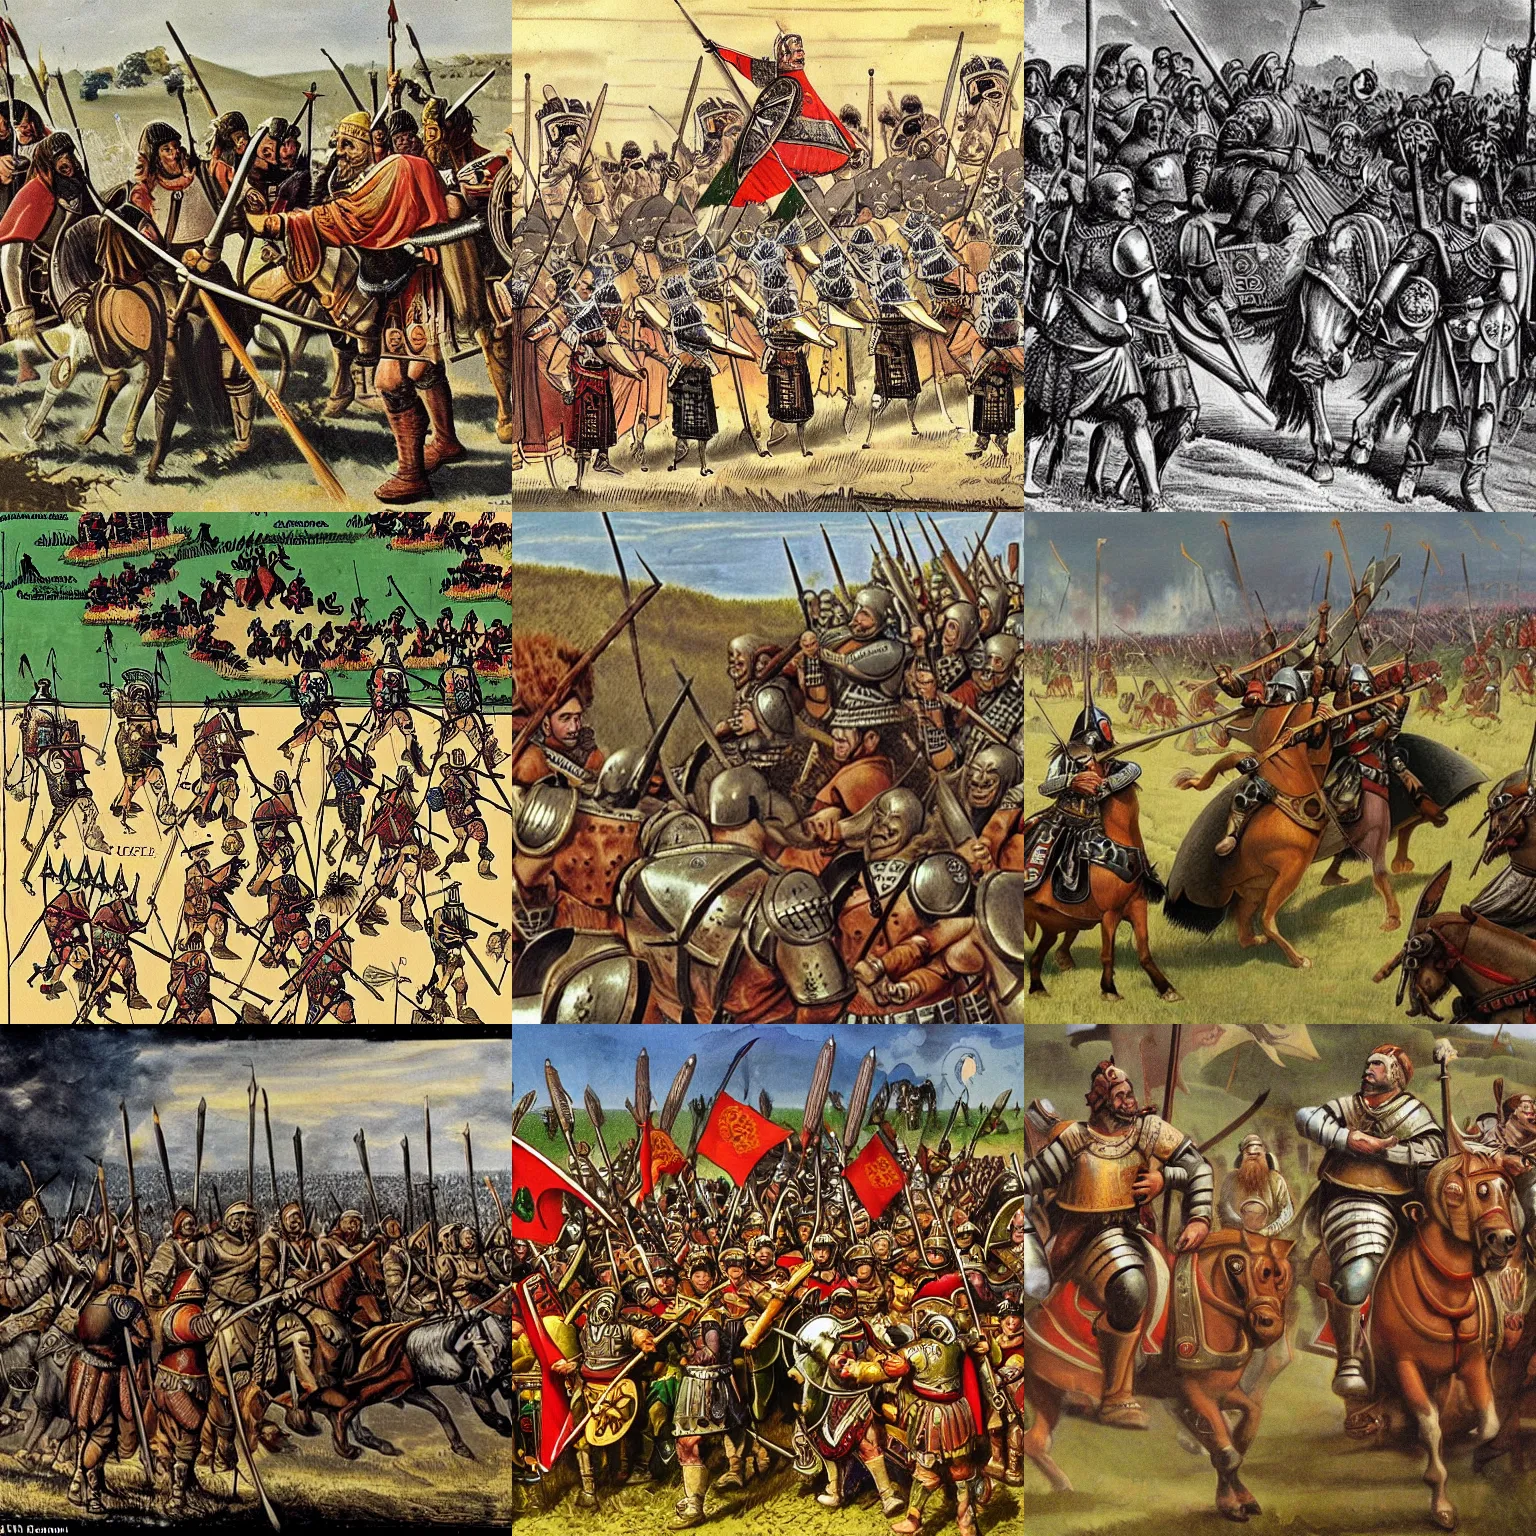 Prompt: the year was 8 9 5 and old magyar conquerors have invaded pannonia along with contingents of orcs and goblins riding horses, wargs and bats